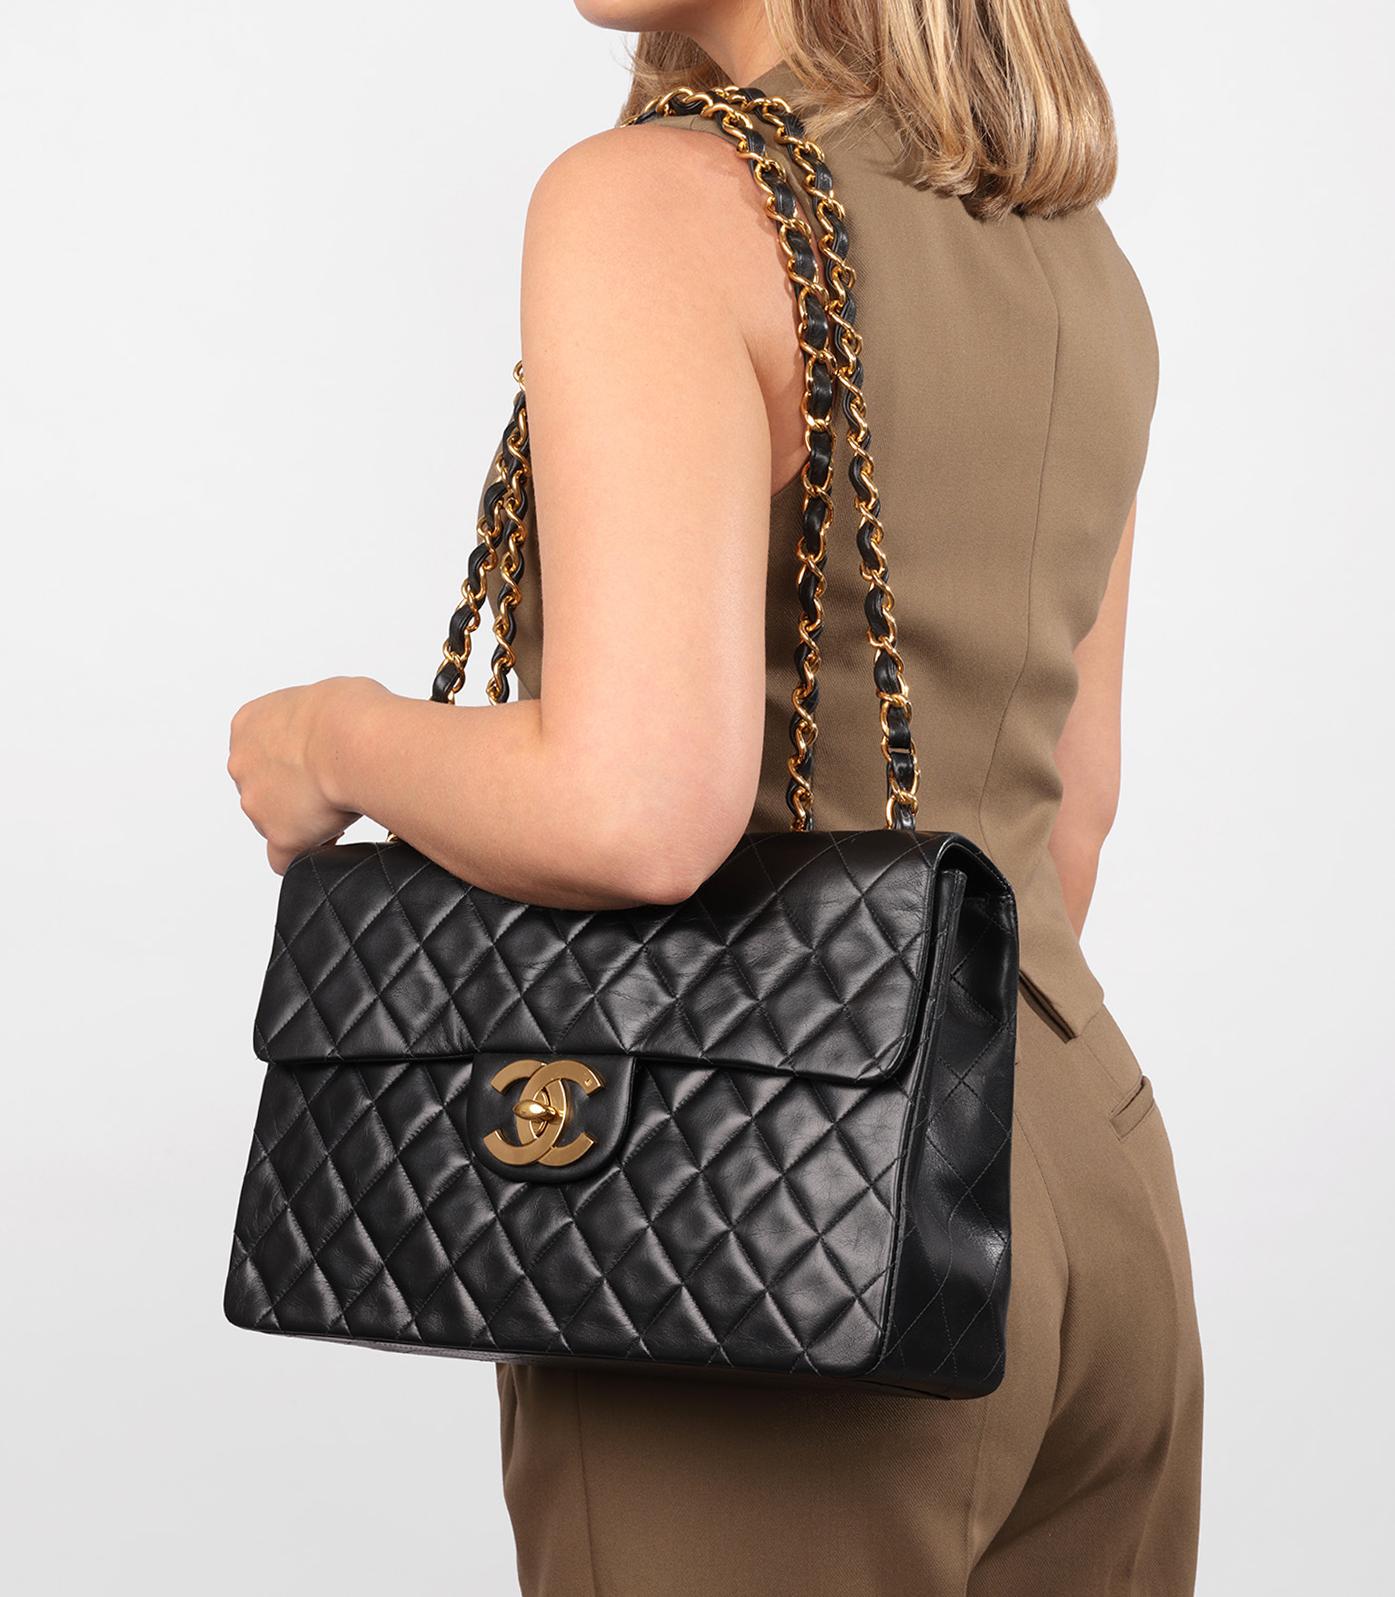 Chanel Black Quilted Lambskin Vintage Maxi Jumbo XL Classic Single Flap Bag

Brand- Chanel
Model- Maxi Jumbo XL Classic Single Flap Bag
Product Type- Crossbody, Shoulder
Serial Number- 24*****
Age- Circa 1991
Accompanied By- Chanel Dust Bag,